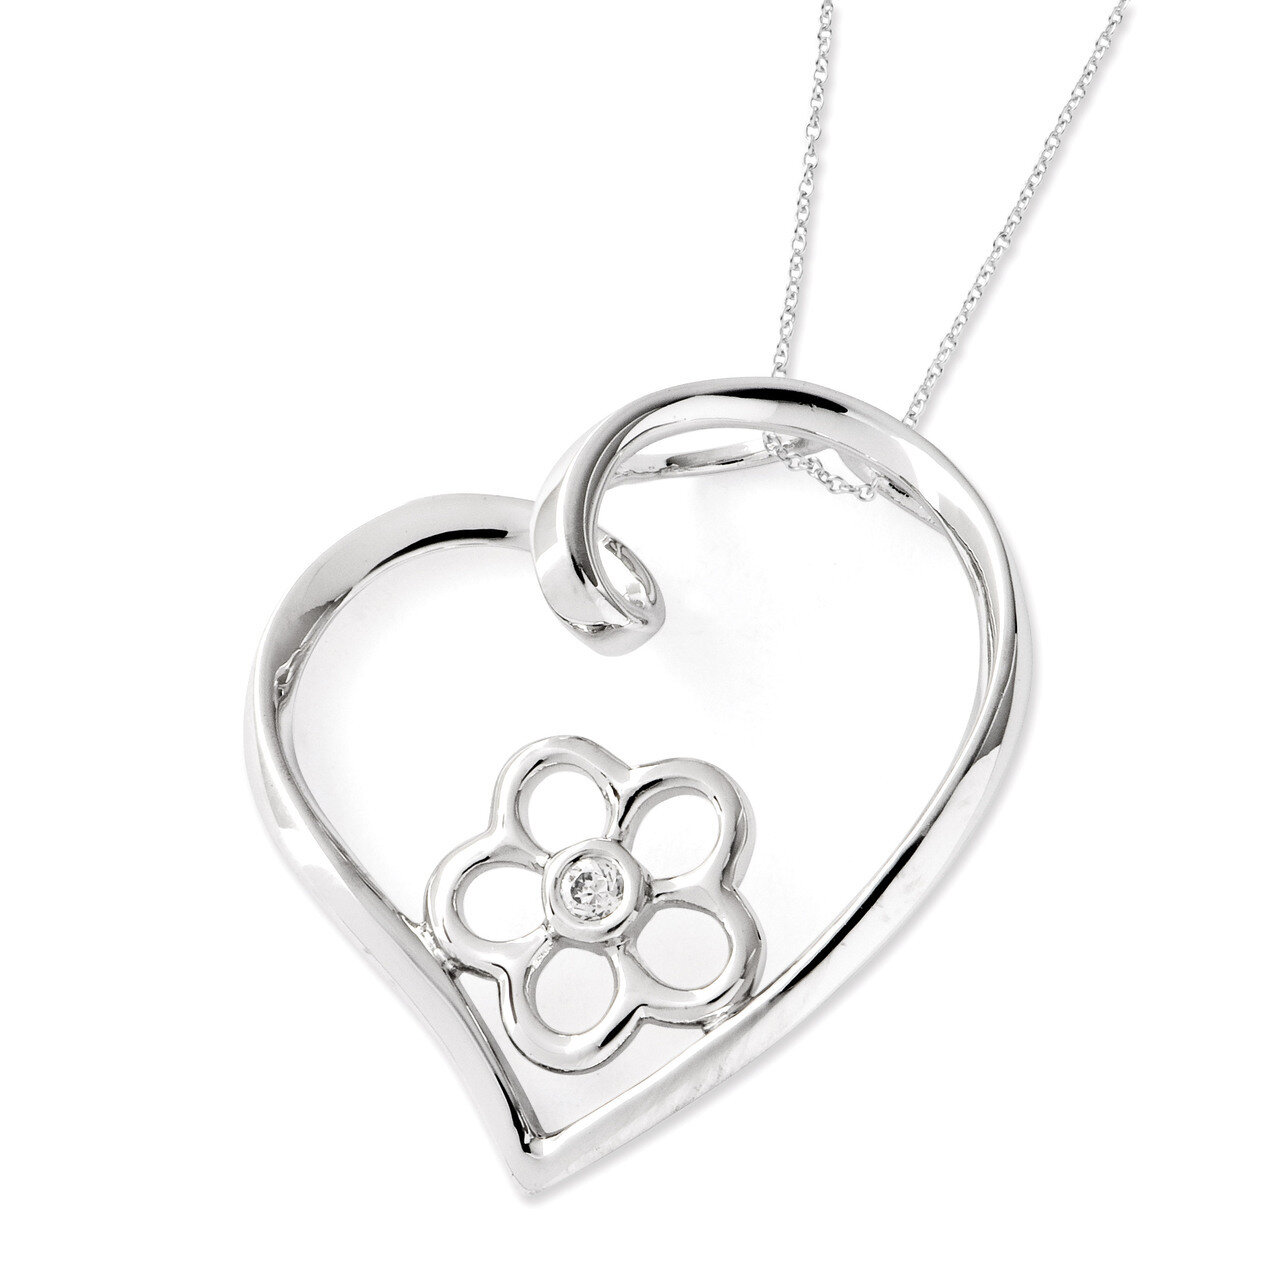 My Special Niece 18 Inch Flower in Heart Necklace Sterling Silver with Diamonds QSX441